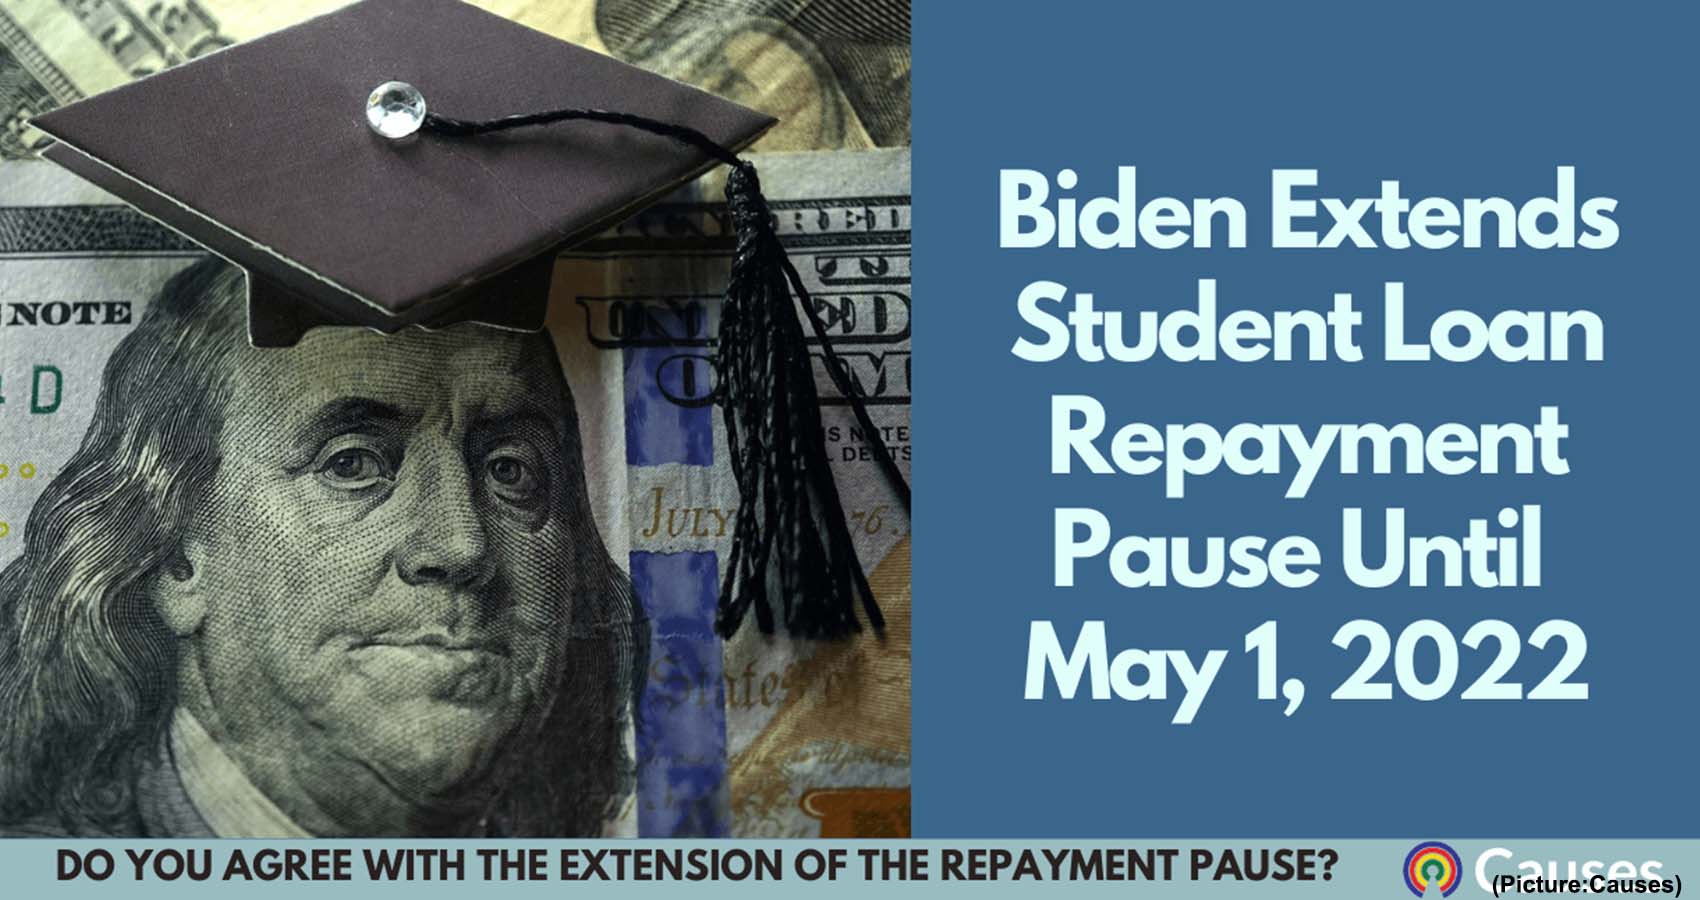 Biden Administration Extends Student Loan Pause Through May 1, 2022